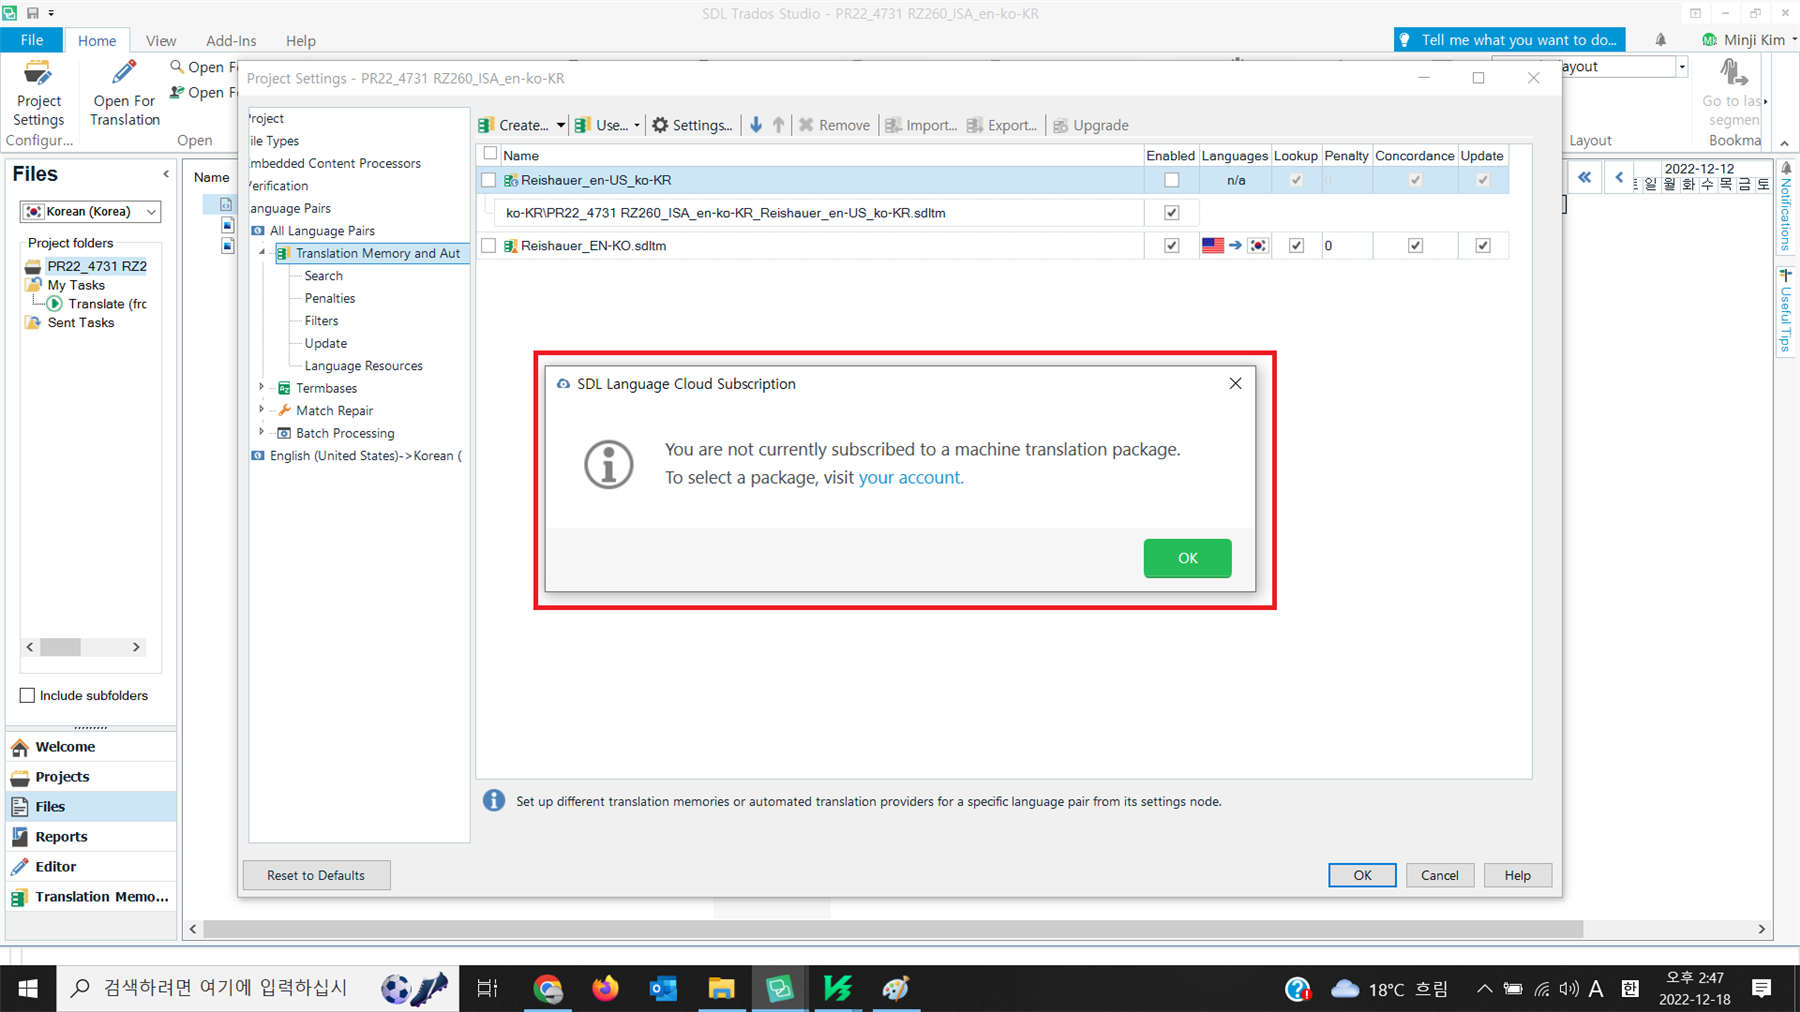 Error message in Trados Studio stating 'You are not currently subscribed to a machine translation package. To select a package, visit your account.' with an OK button.